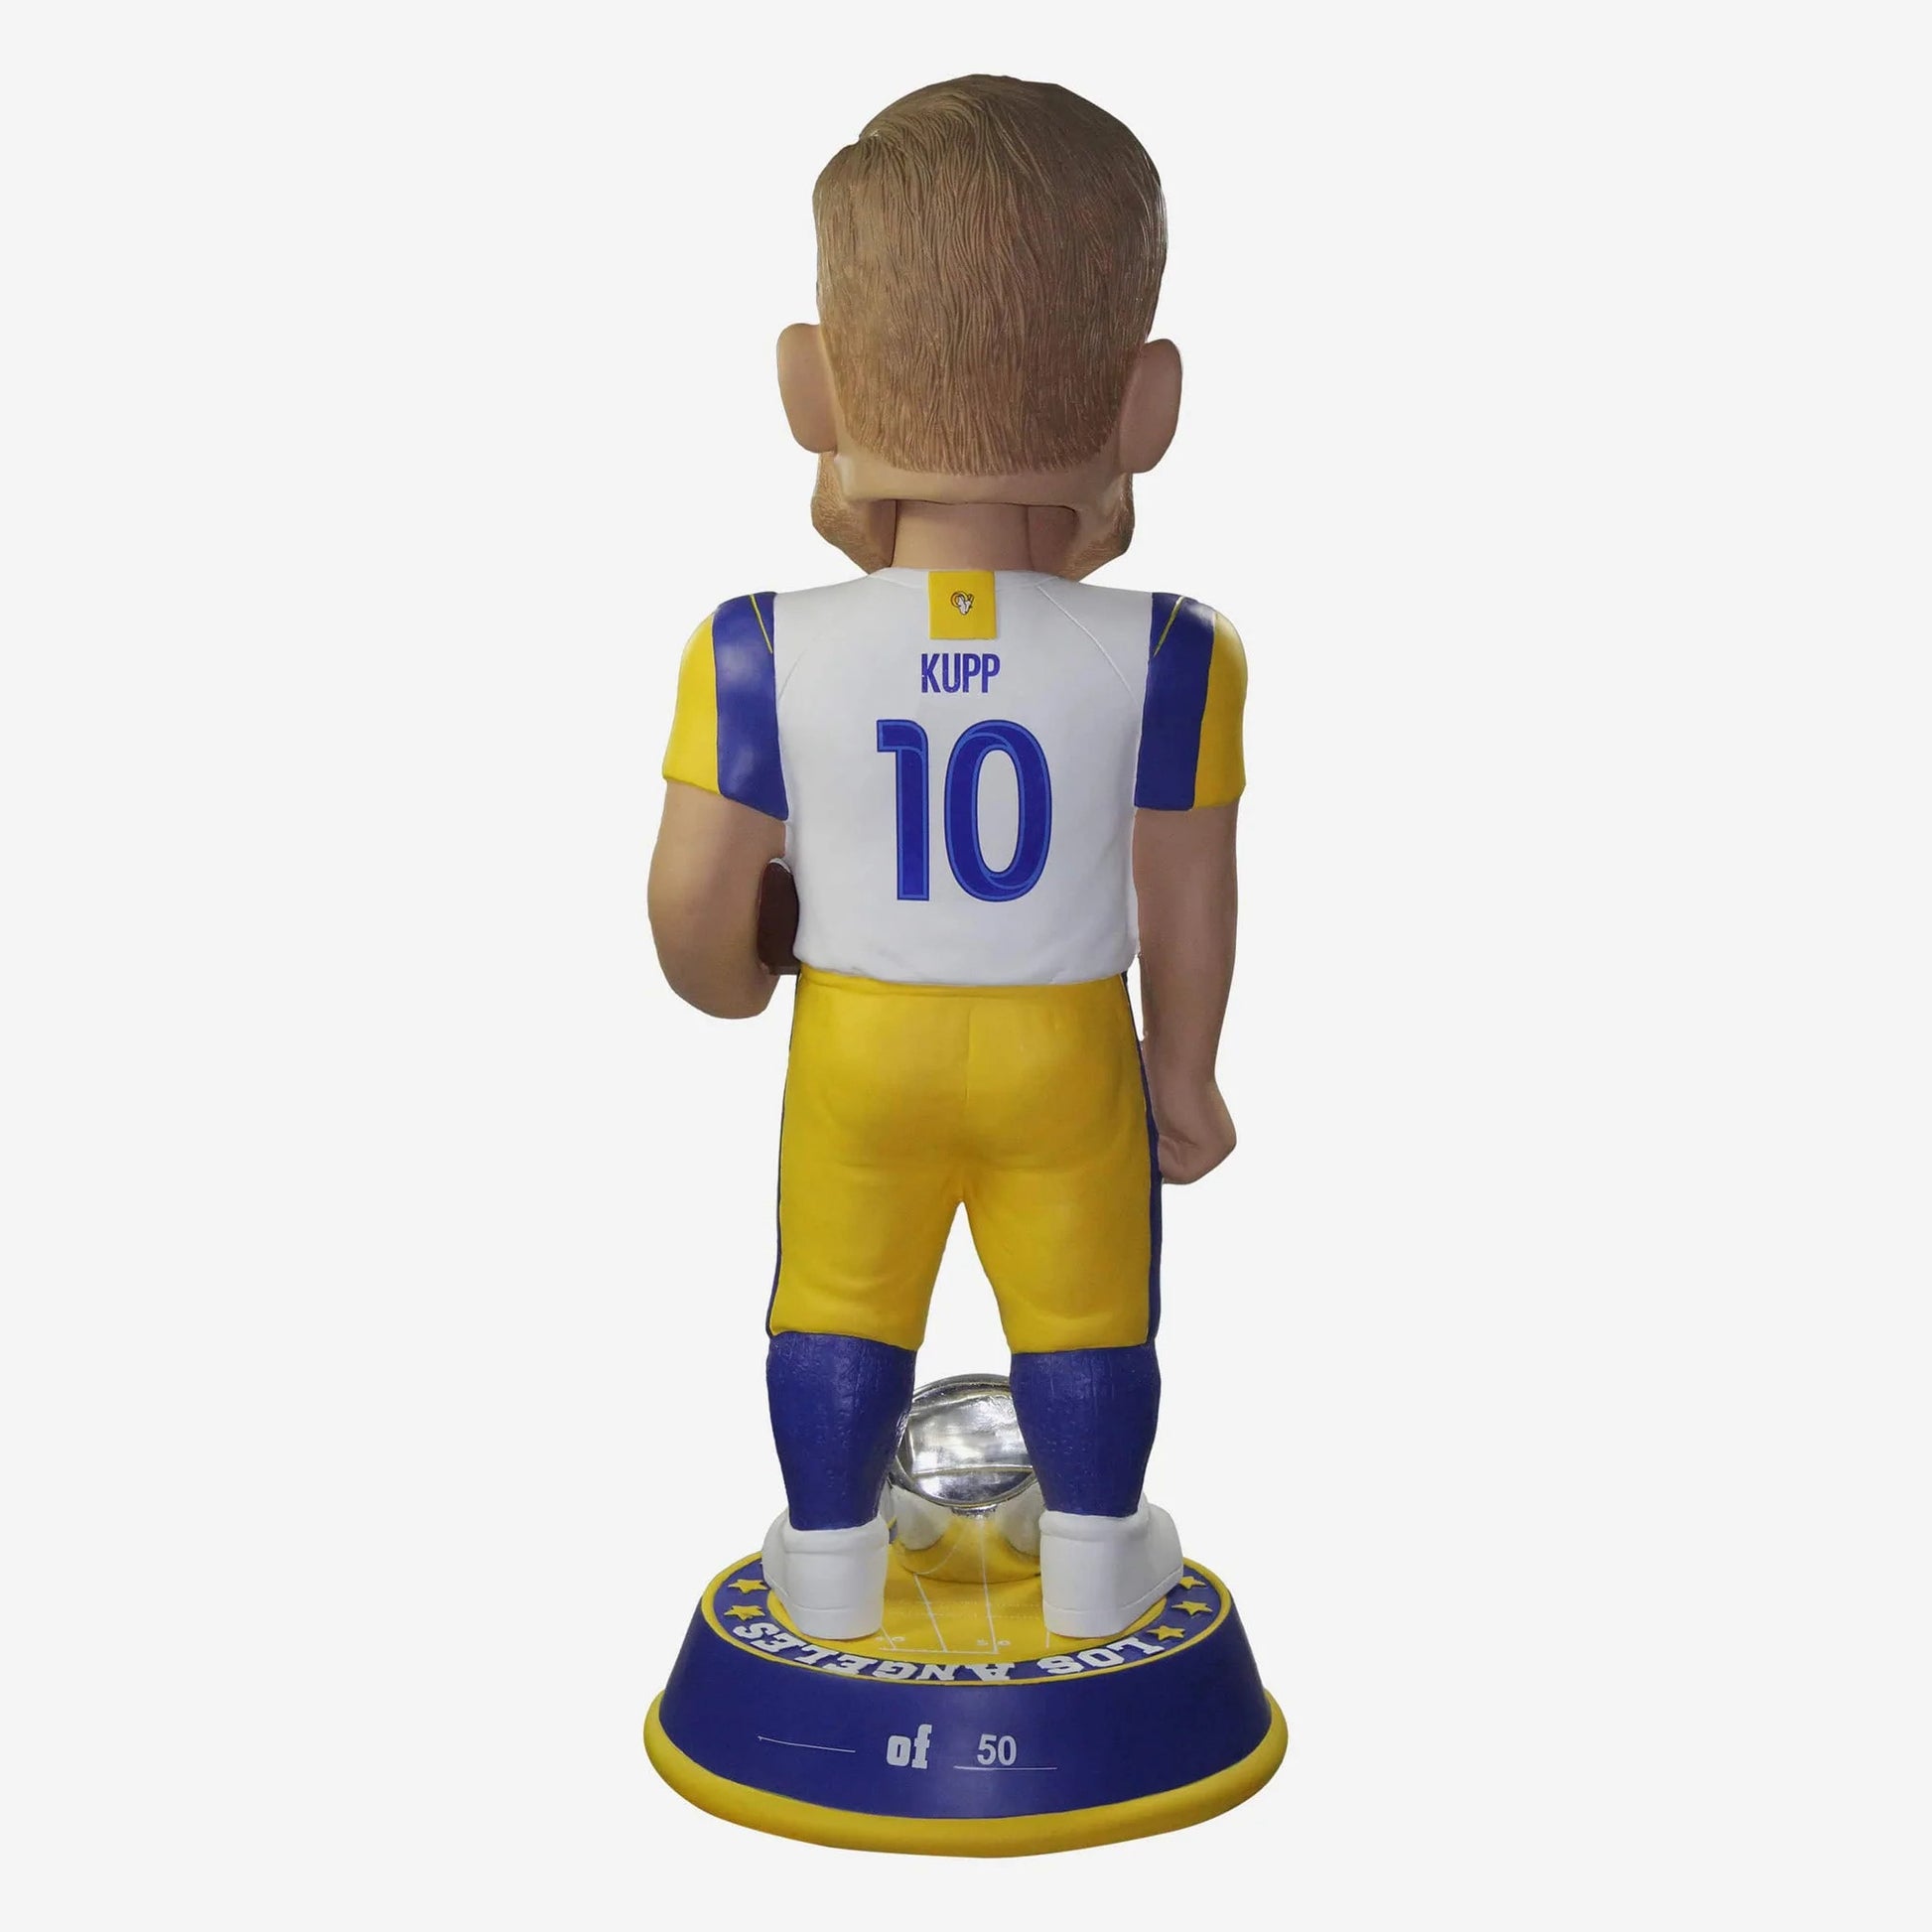 Cooper Kupp Los Angeles Rams Super Bowl LVI Champions 3 ft Bobblehead Officially Licensed by NFL